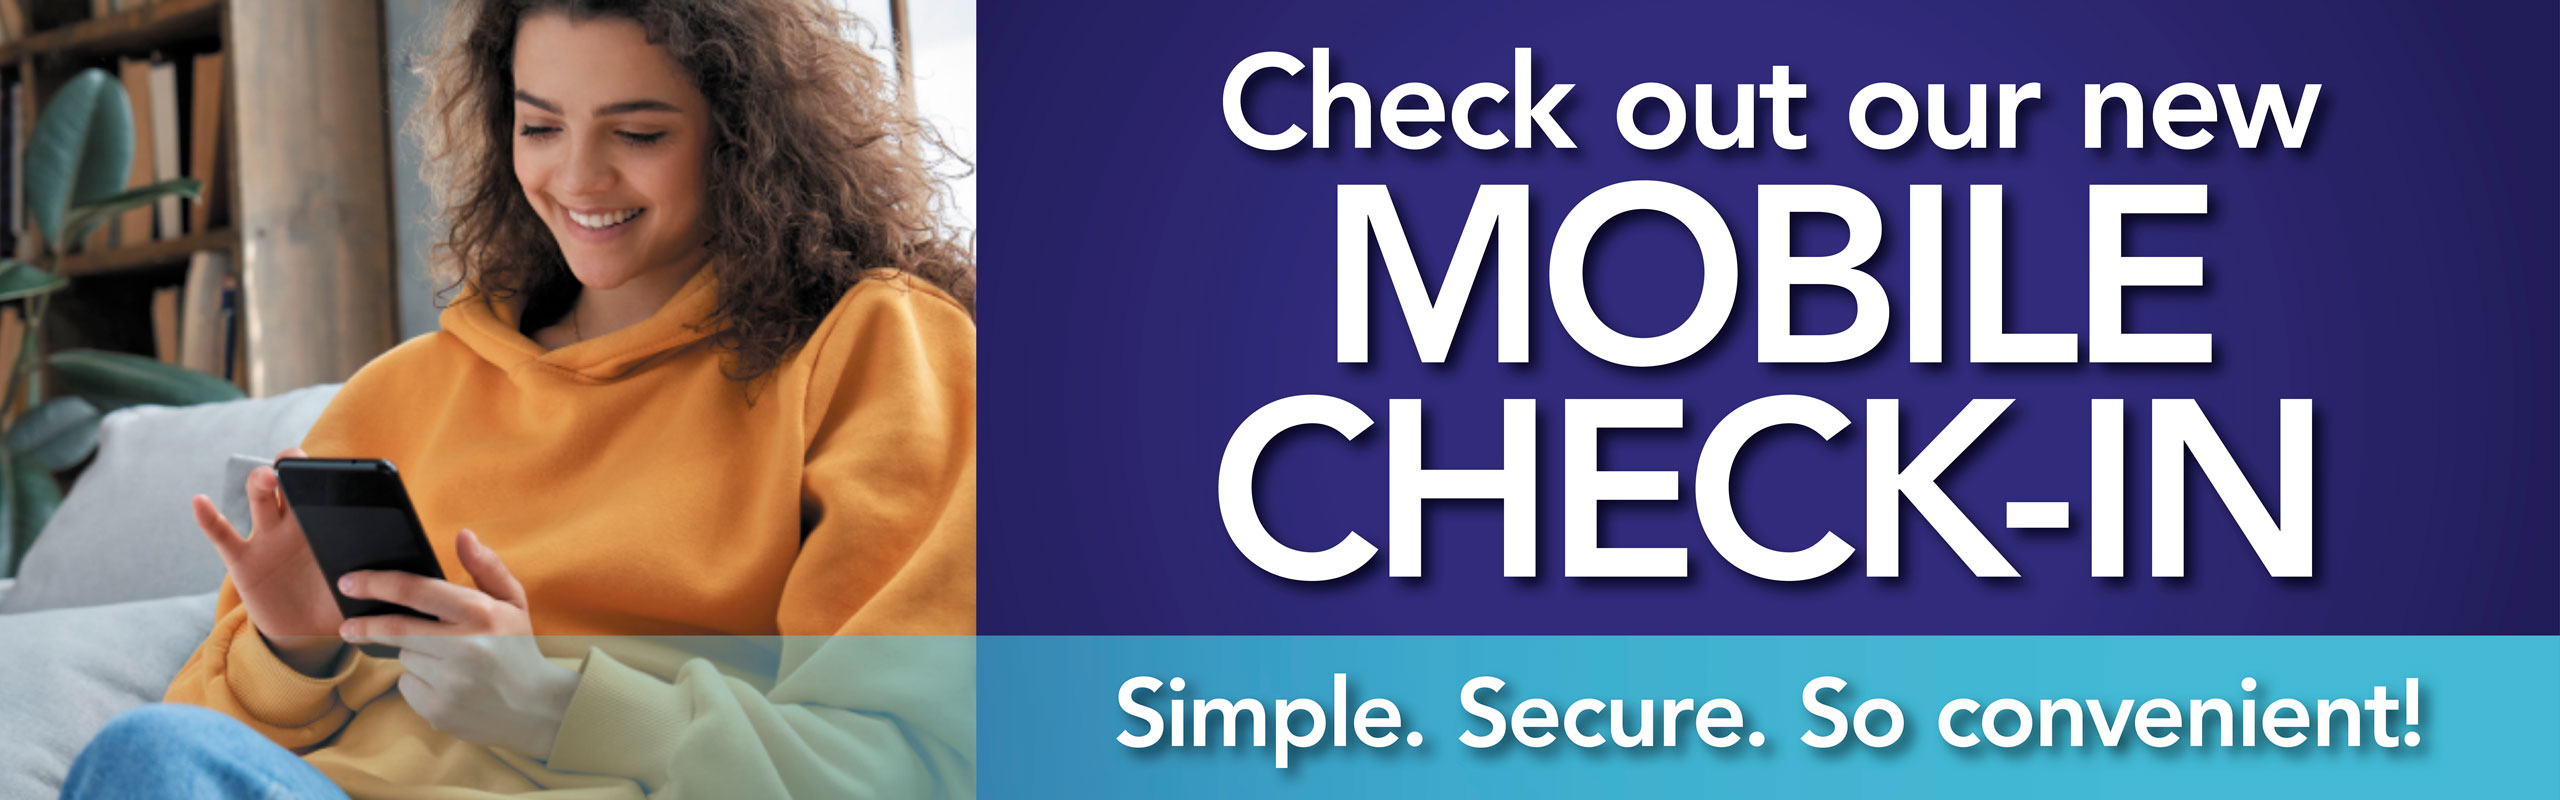 Check out our new Mobile CHECK-IN that is Simple , Secure , and so Comvemiemt!